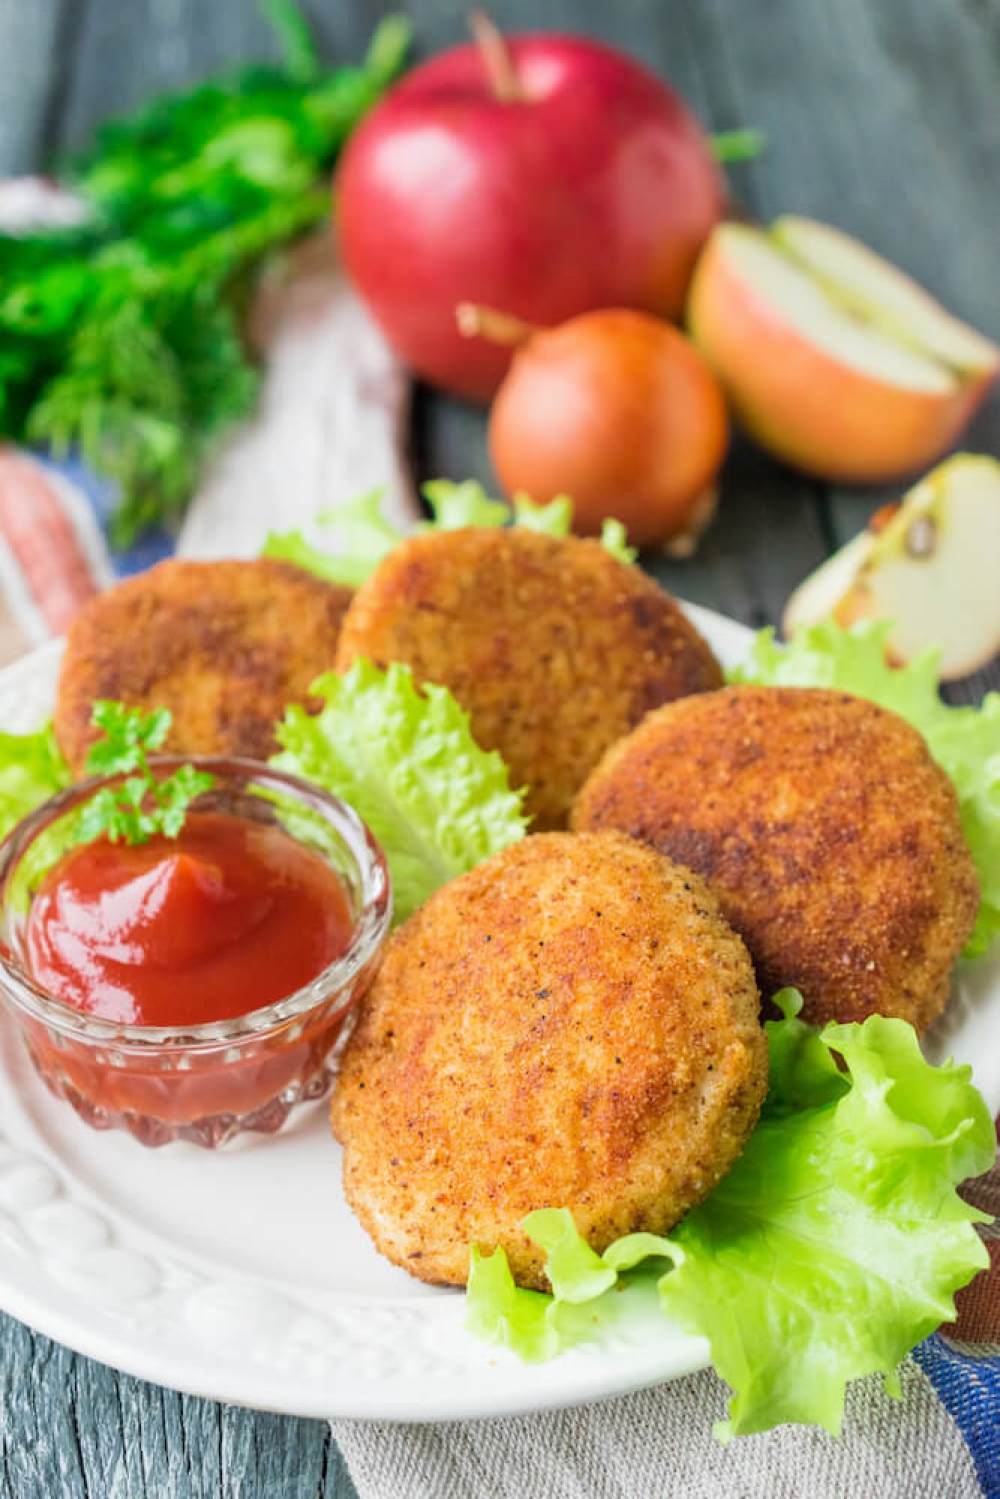 Chicken Fritters with Semolina and Apples